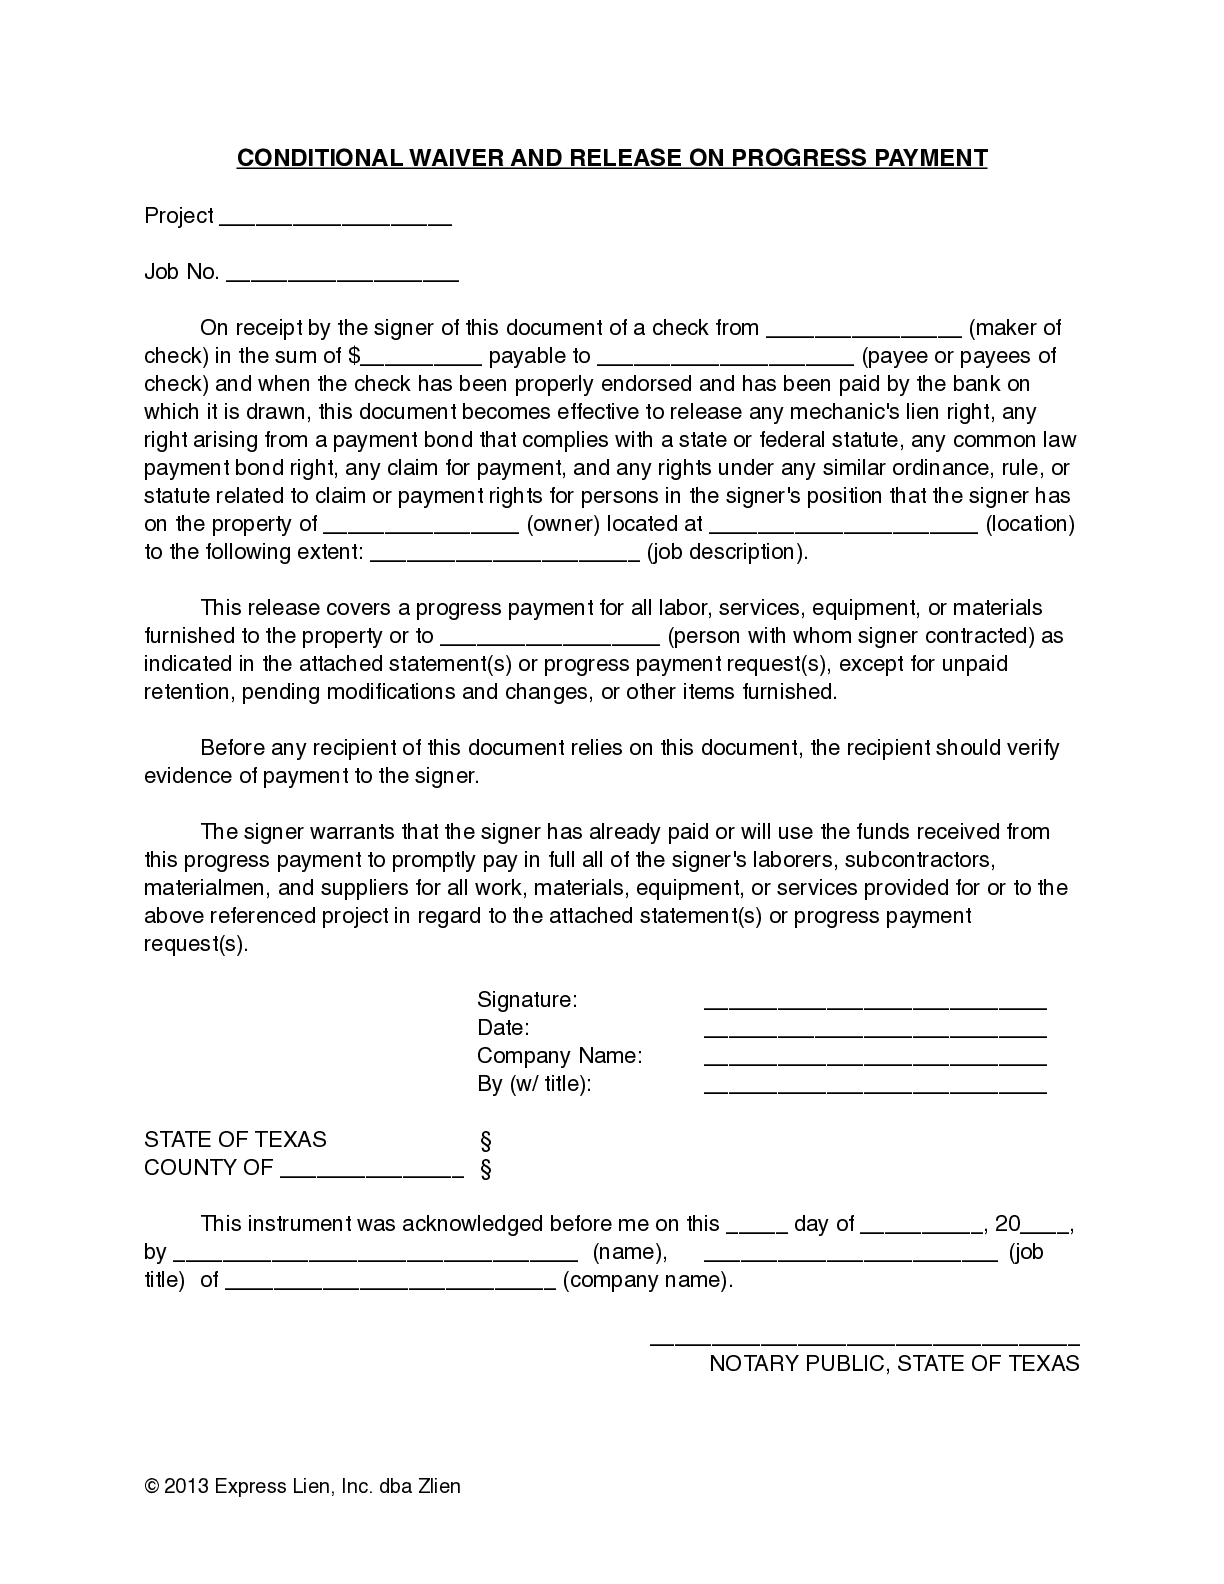 Texas Partial Conditional Lien Waiver Form - free from